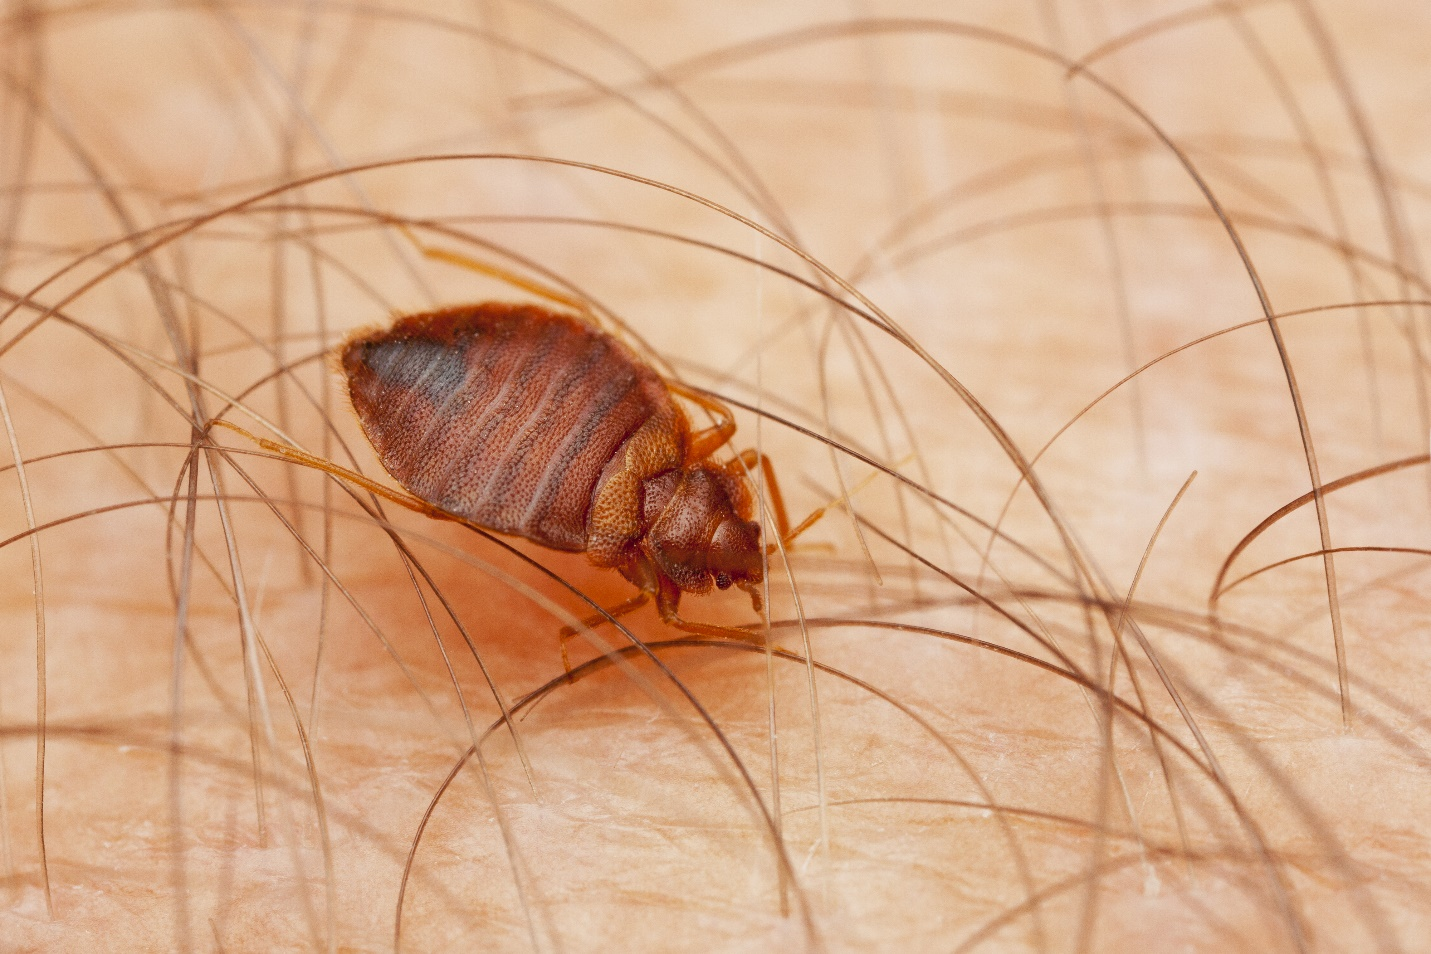 Effective Detection and Treatment Strategies for Bed Bug Control Woodbridge